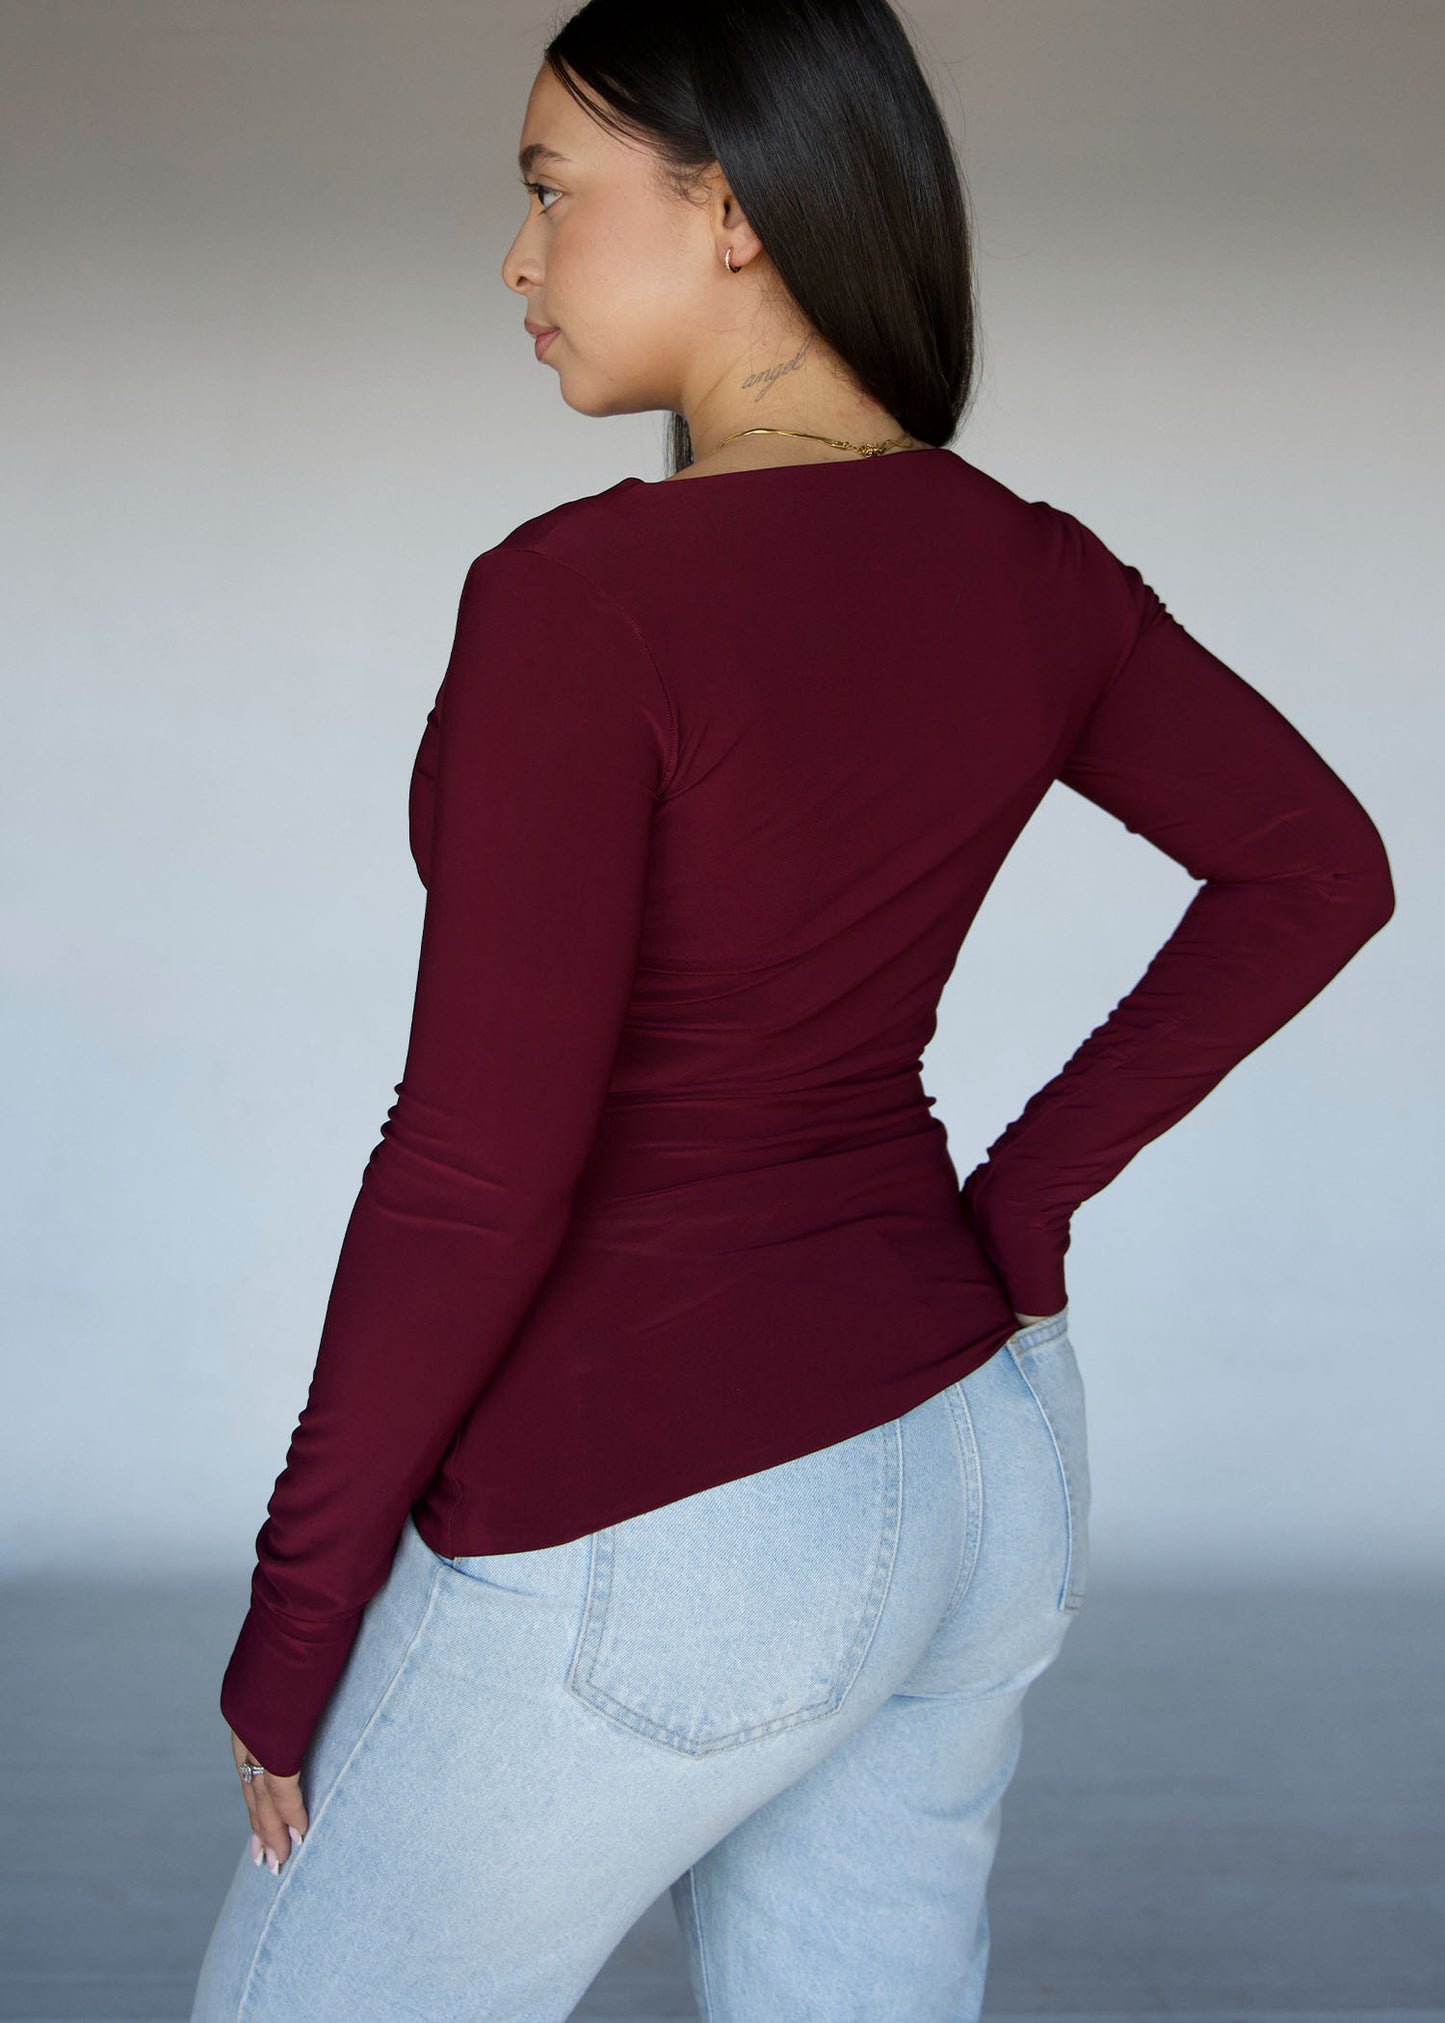 Maroon Square Neck Long Sleeved Top